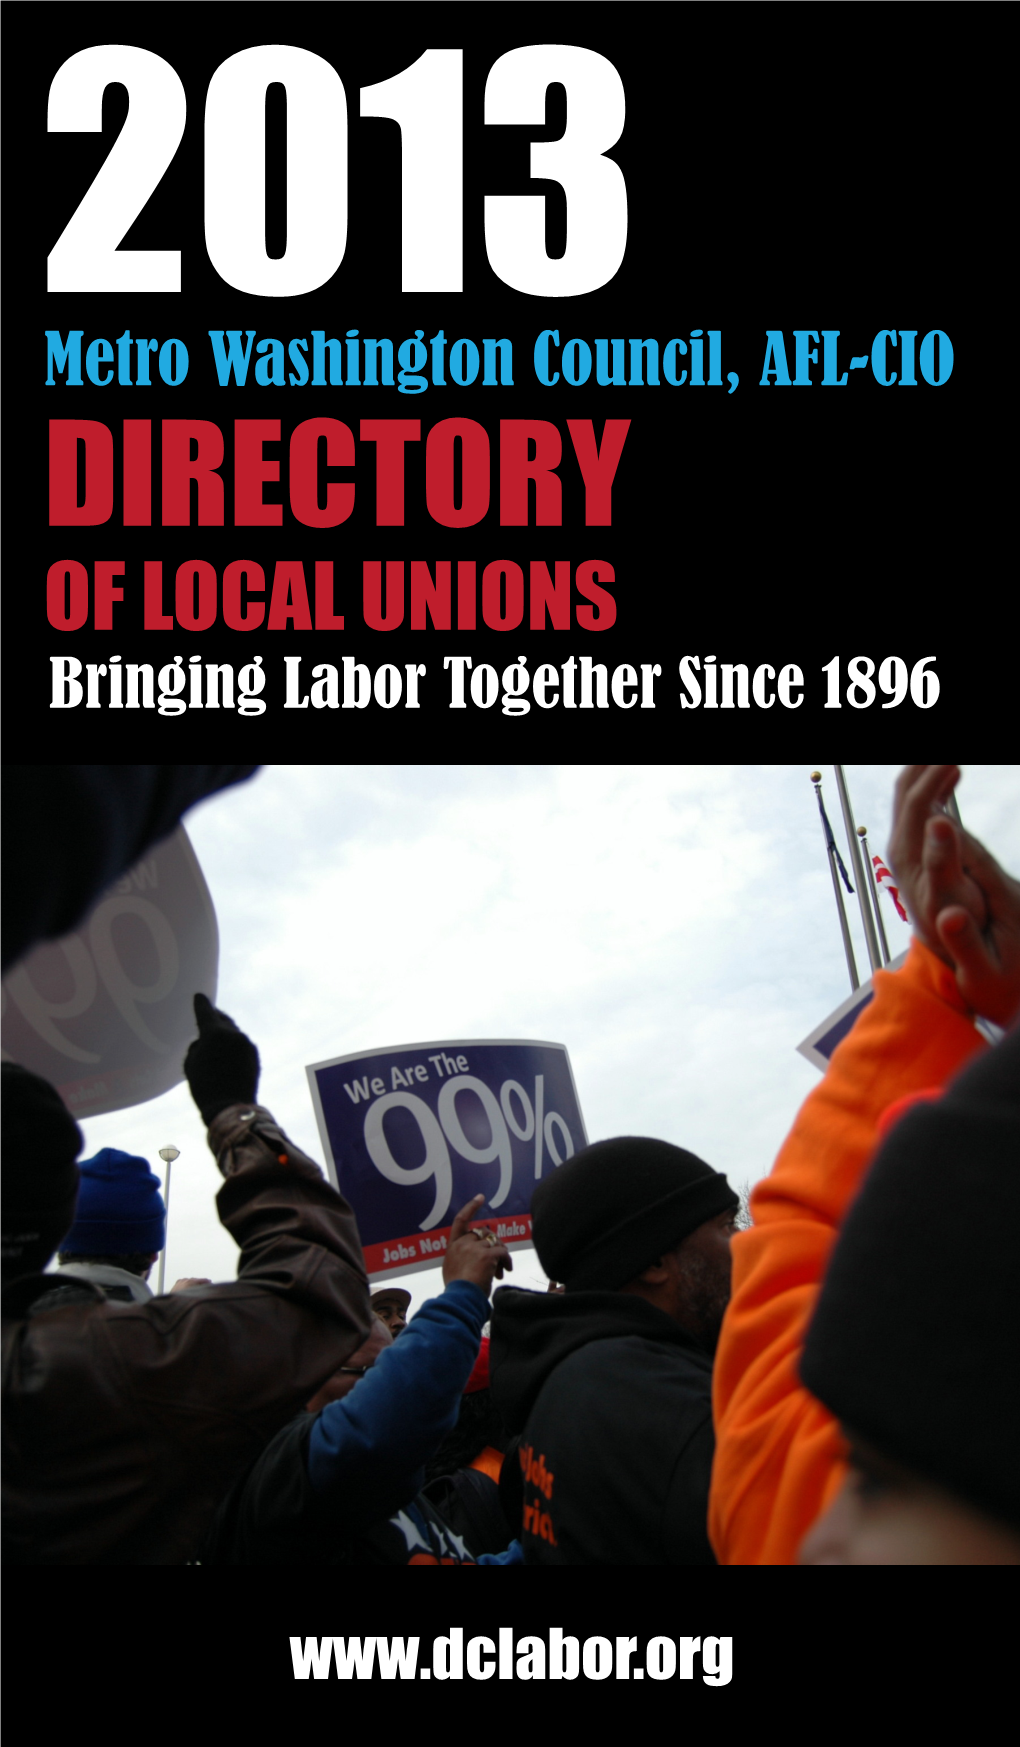 DIRECTORY of LOCAL UNIONS Bringing Labor Together Since 1896